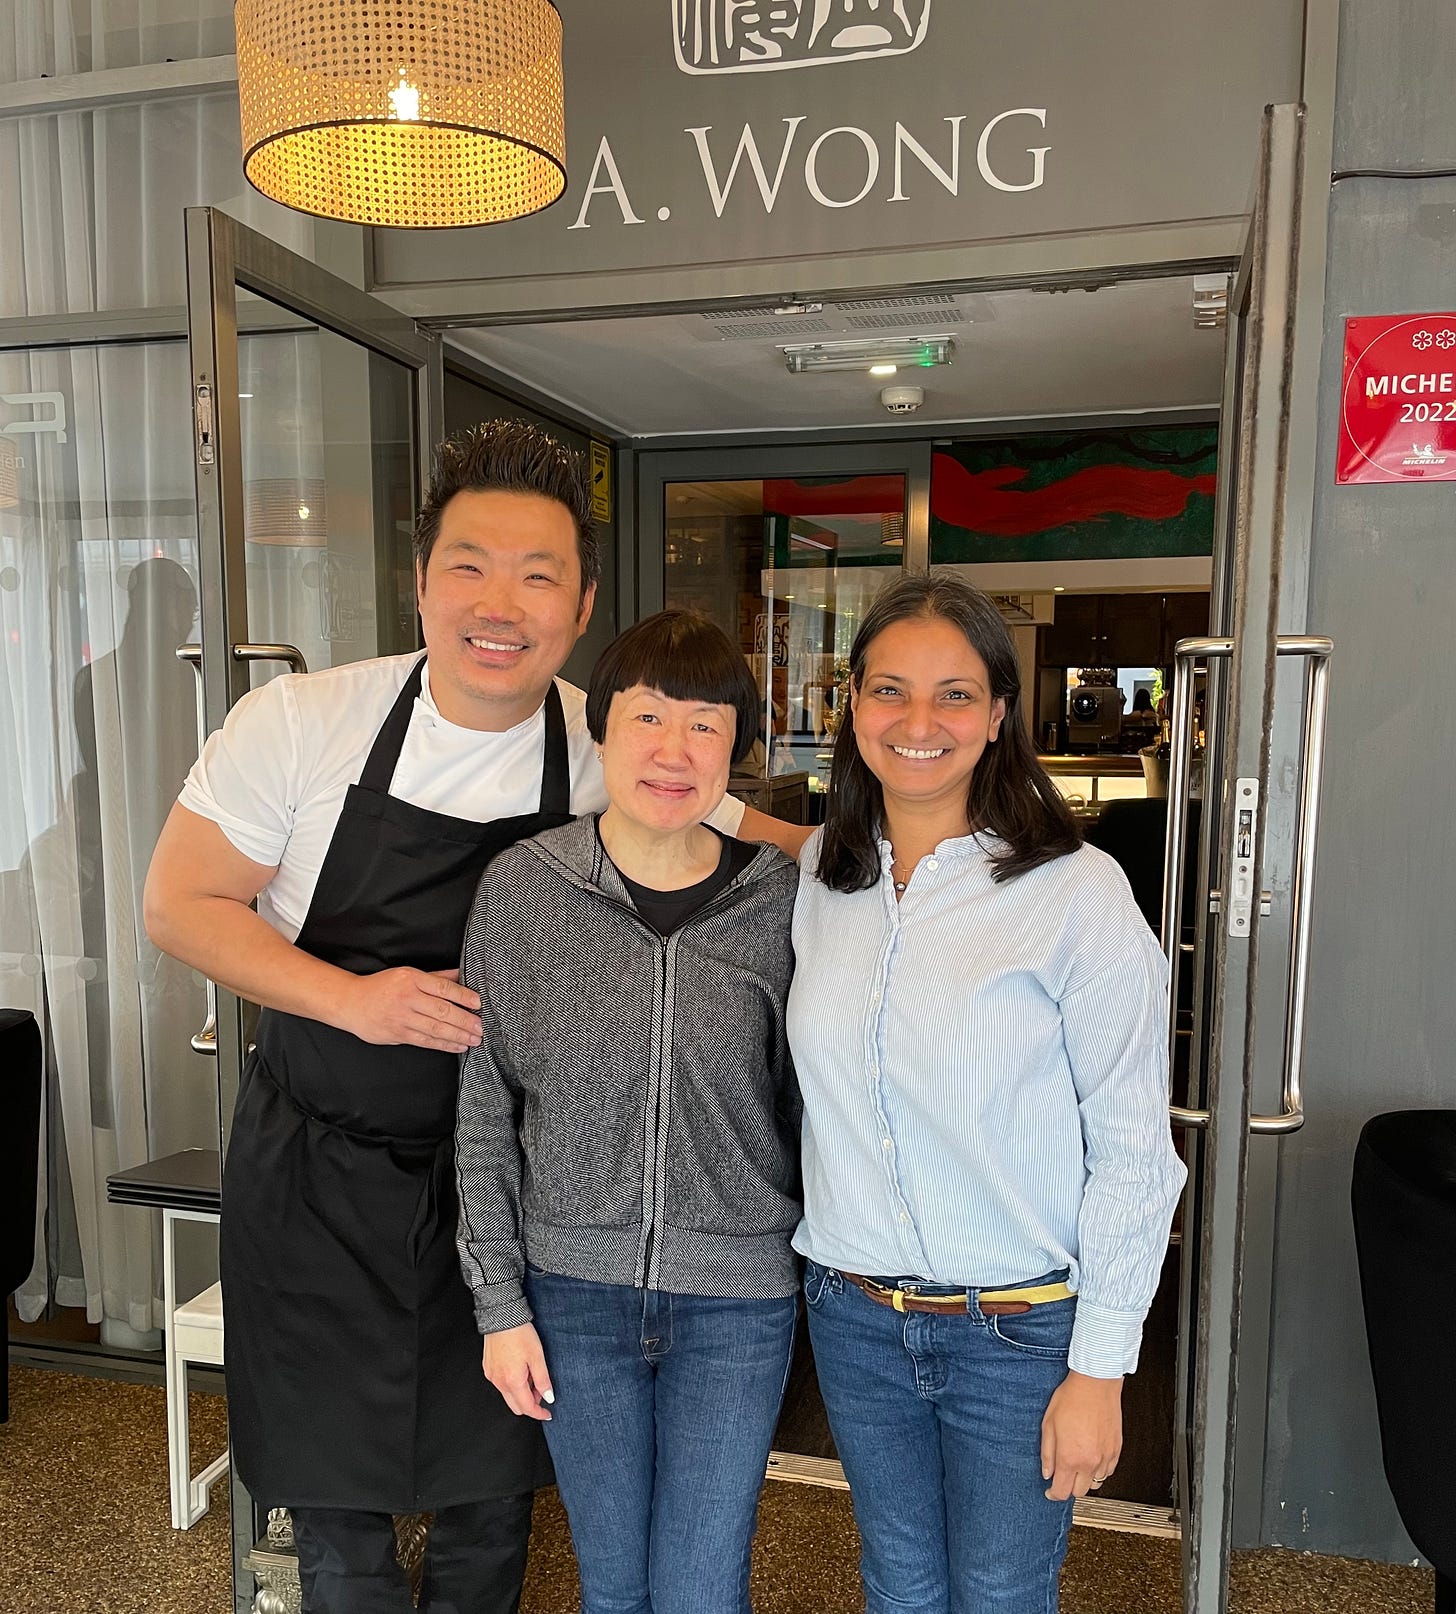 Three people outside the double doors of a restaurant smiling at the camera